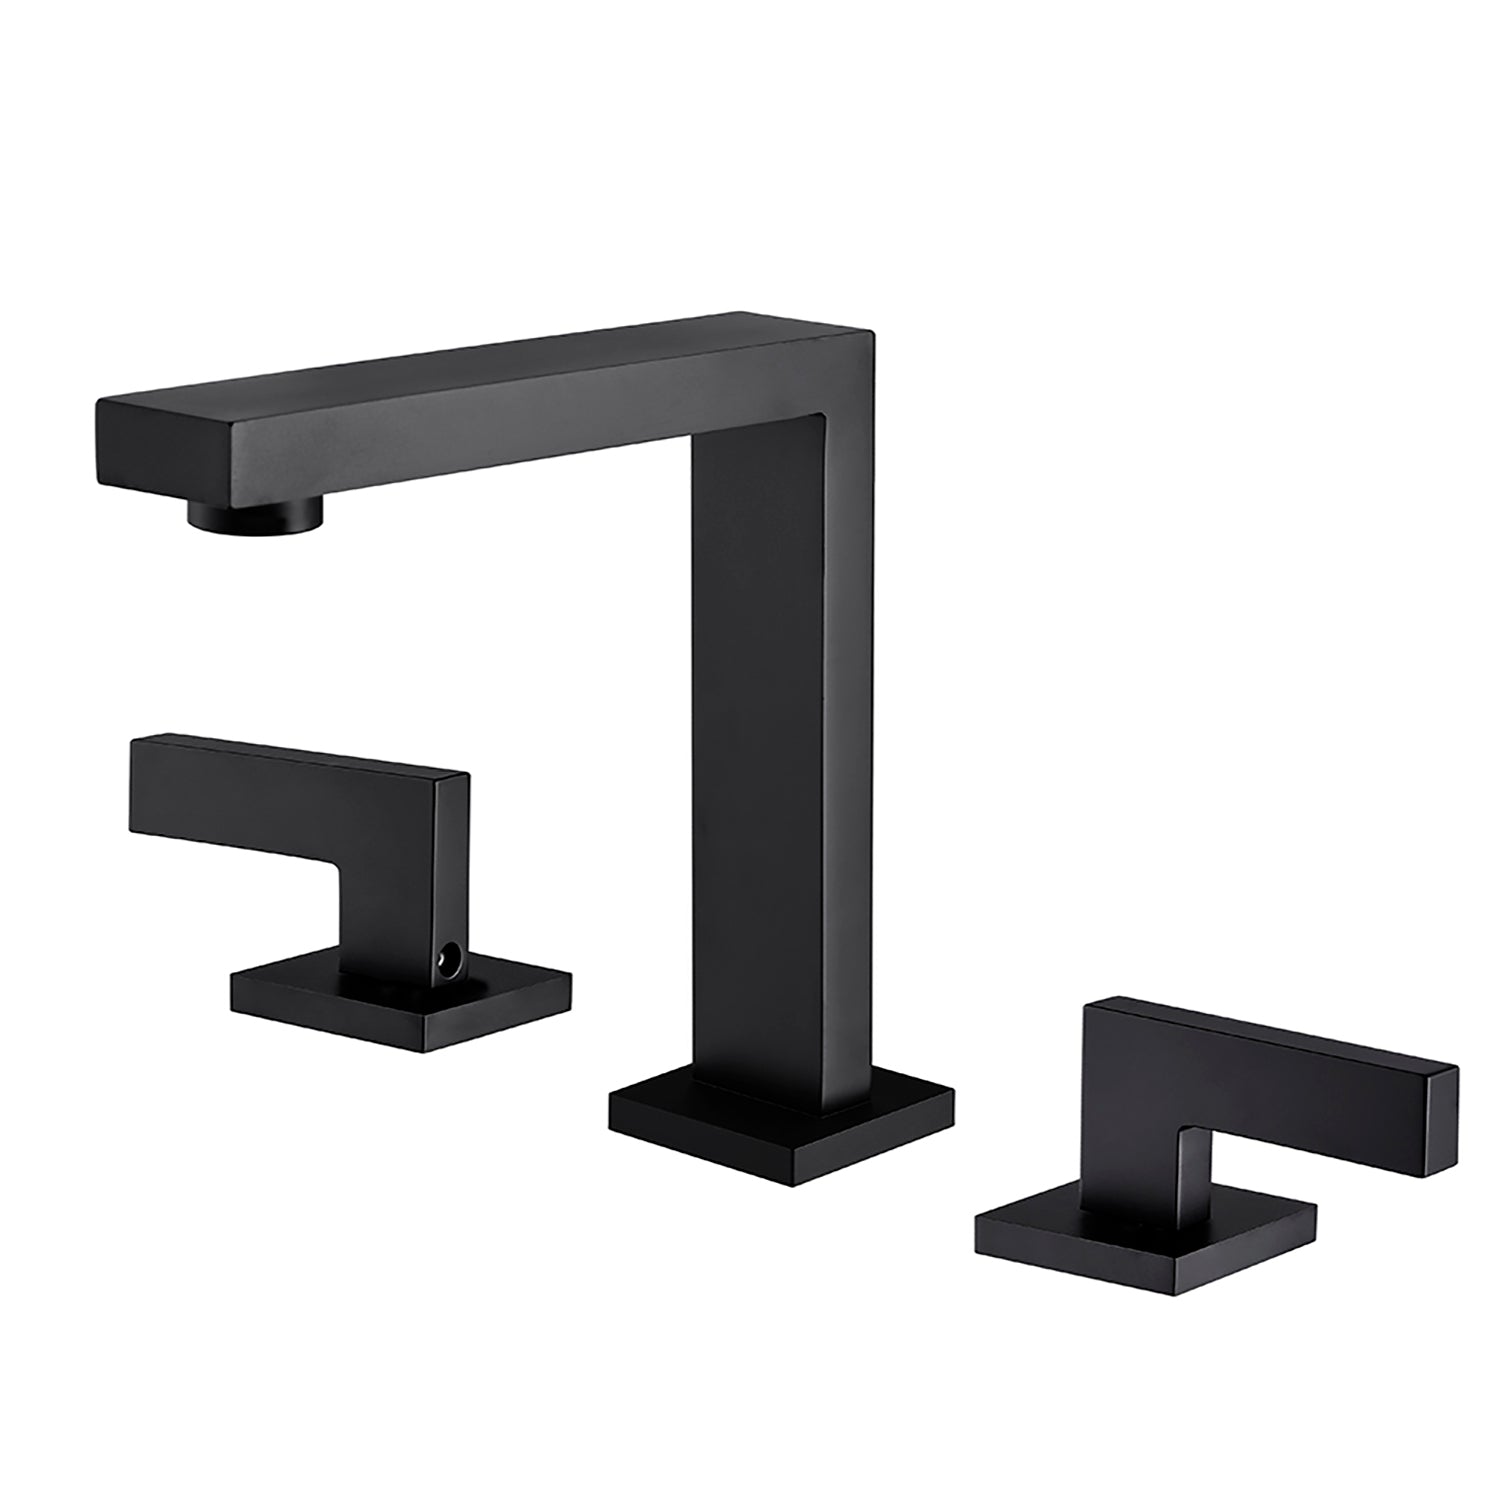 Boyel Living 8 in. Widespread 2-Handle High-Arc Bathroom Faucet with Ceramic Disk Valve in Matte Black-Boyel Living